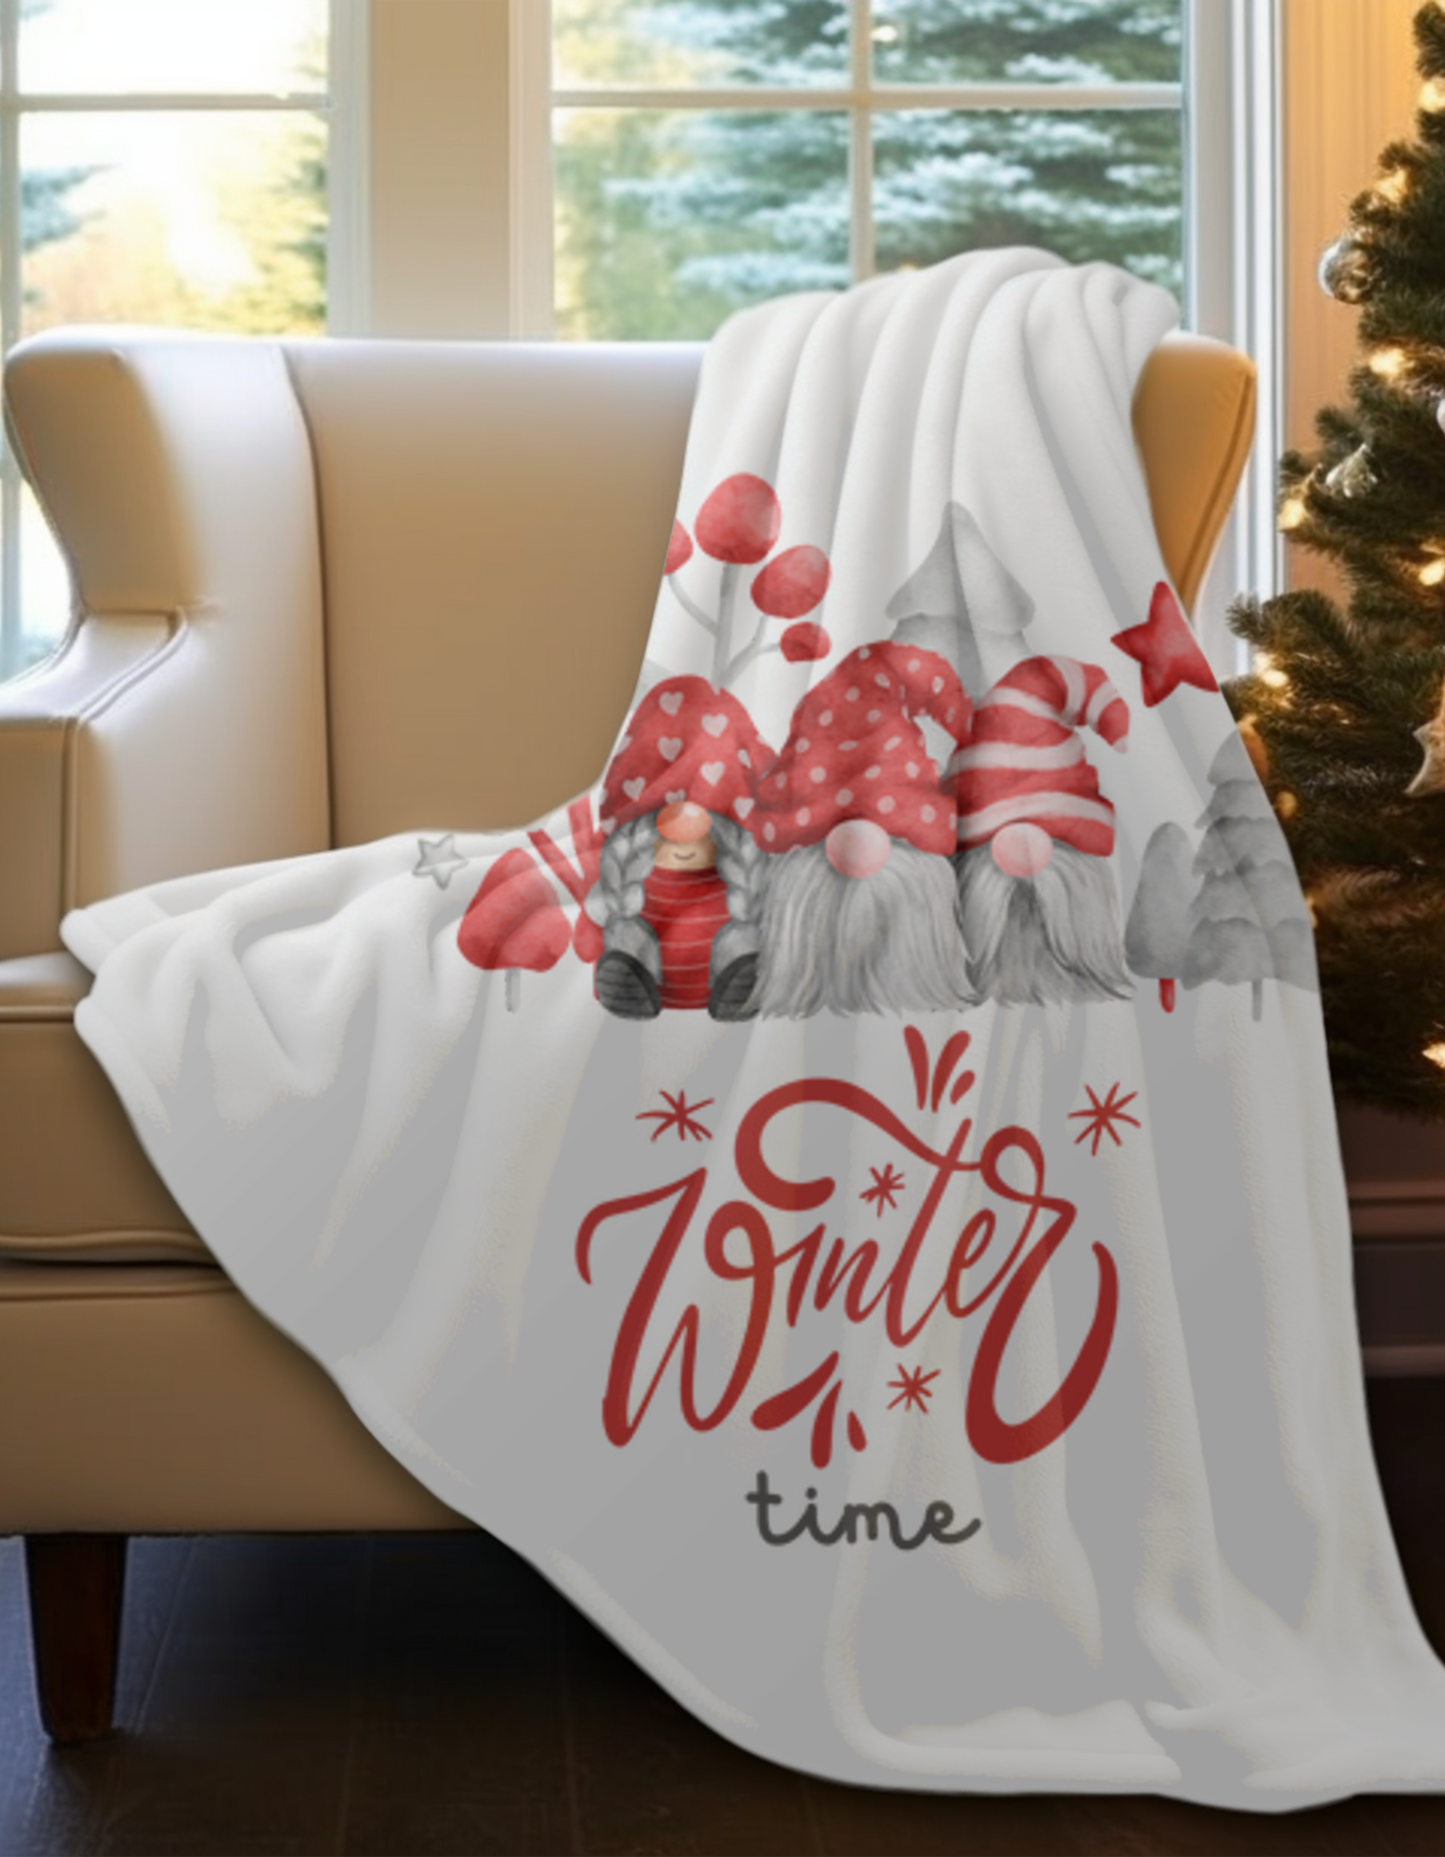 Winter Time soft and comfy velveteen Plush Blanket